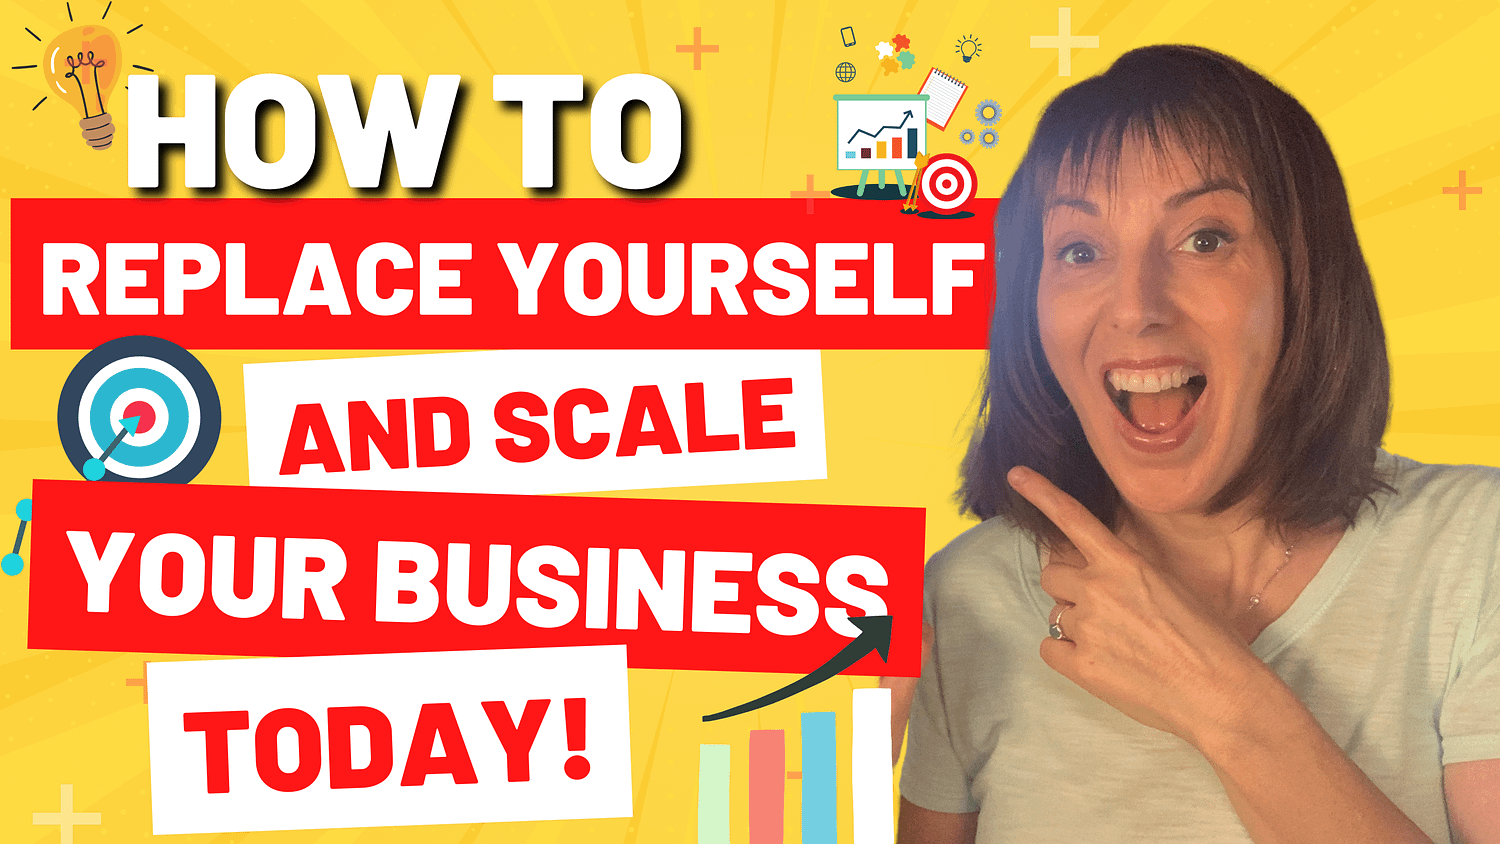 How To Replace Yourself And Scale Your Business Today!